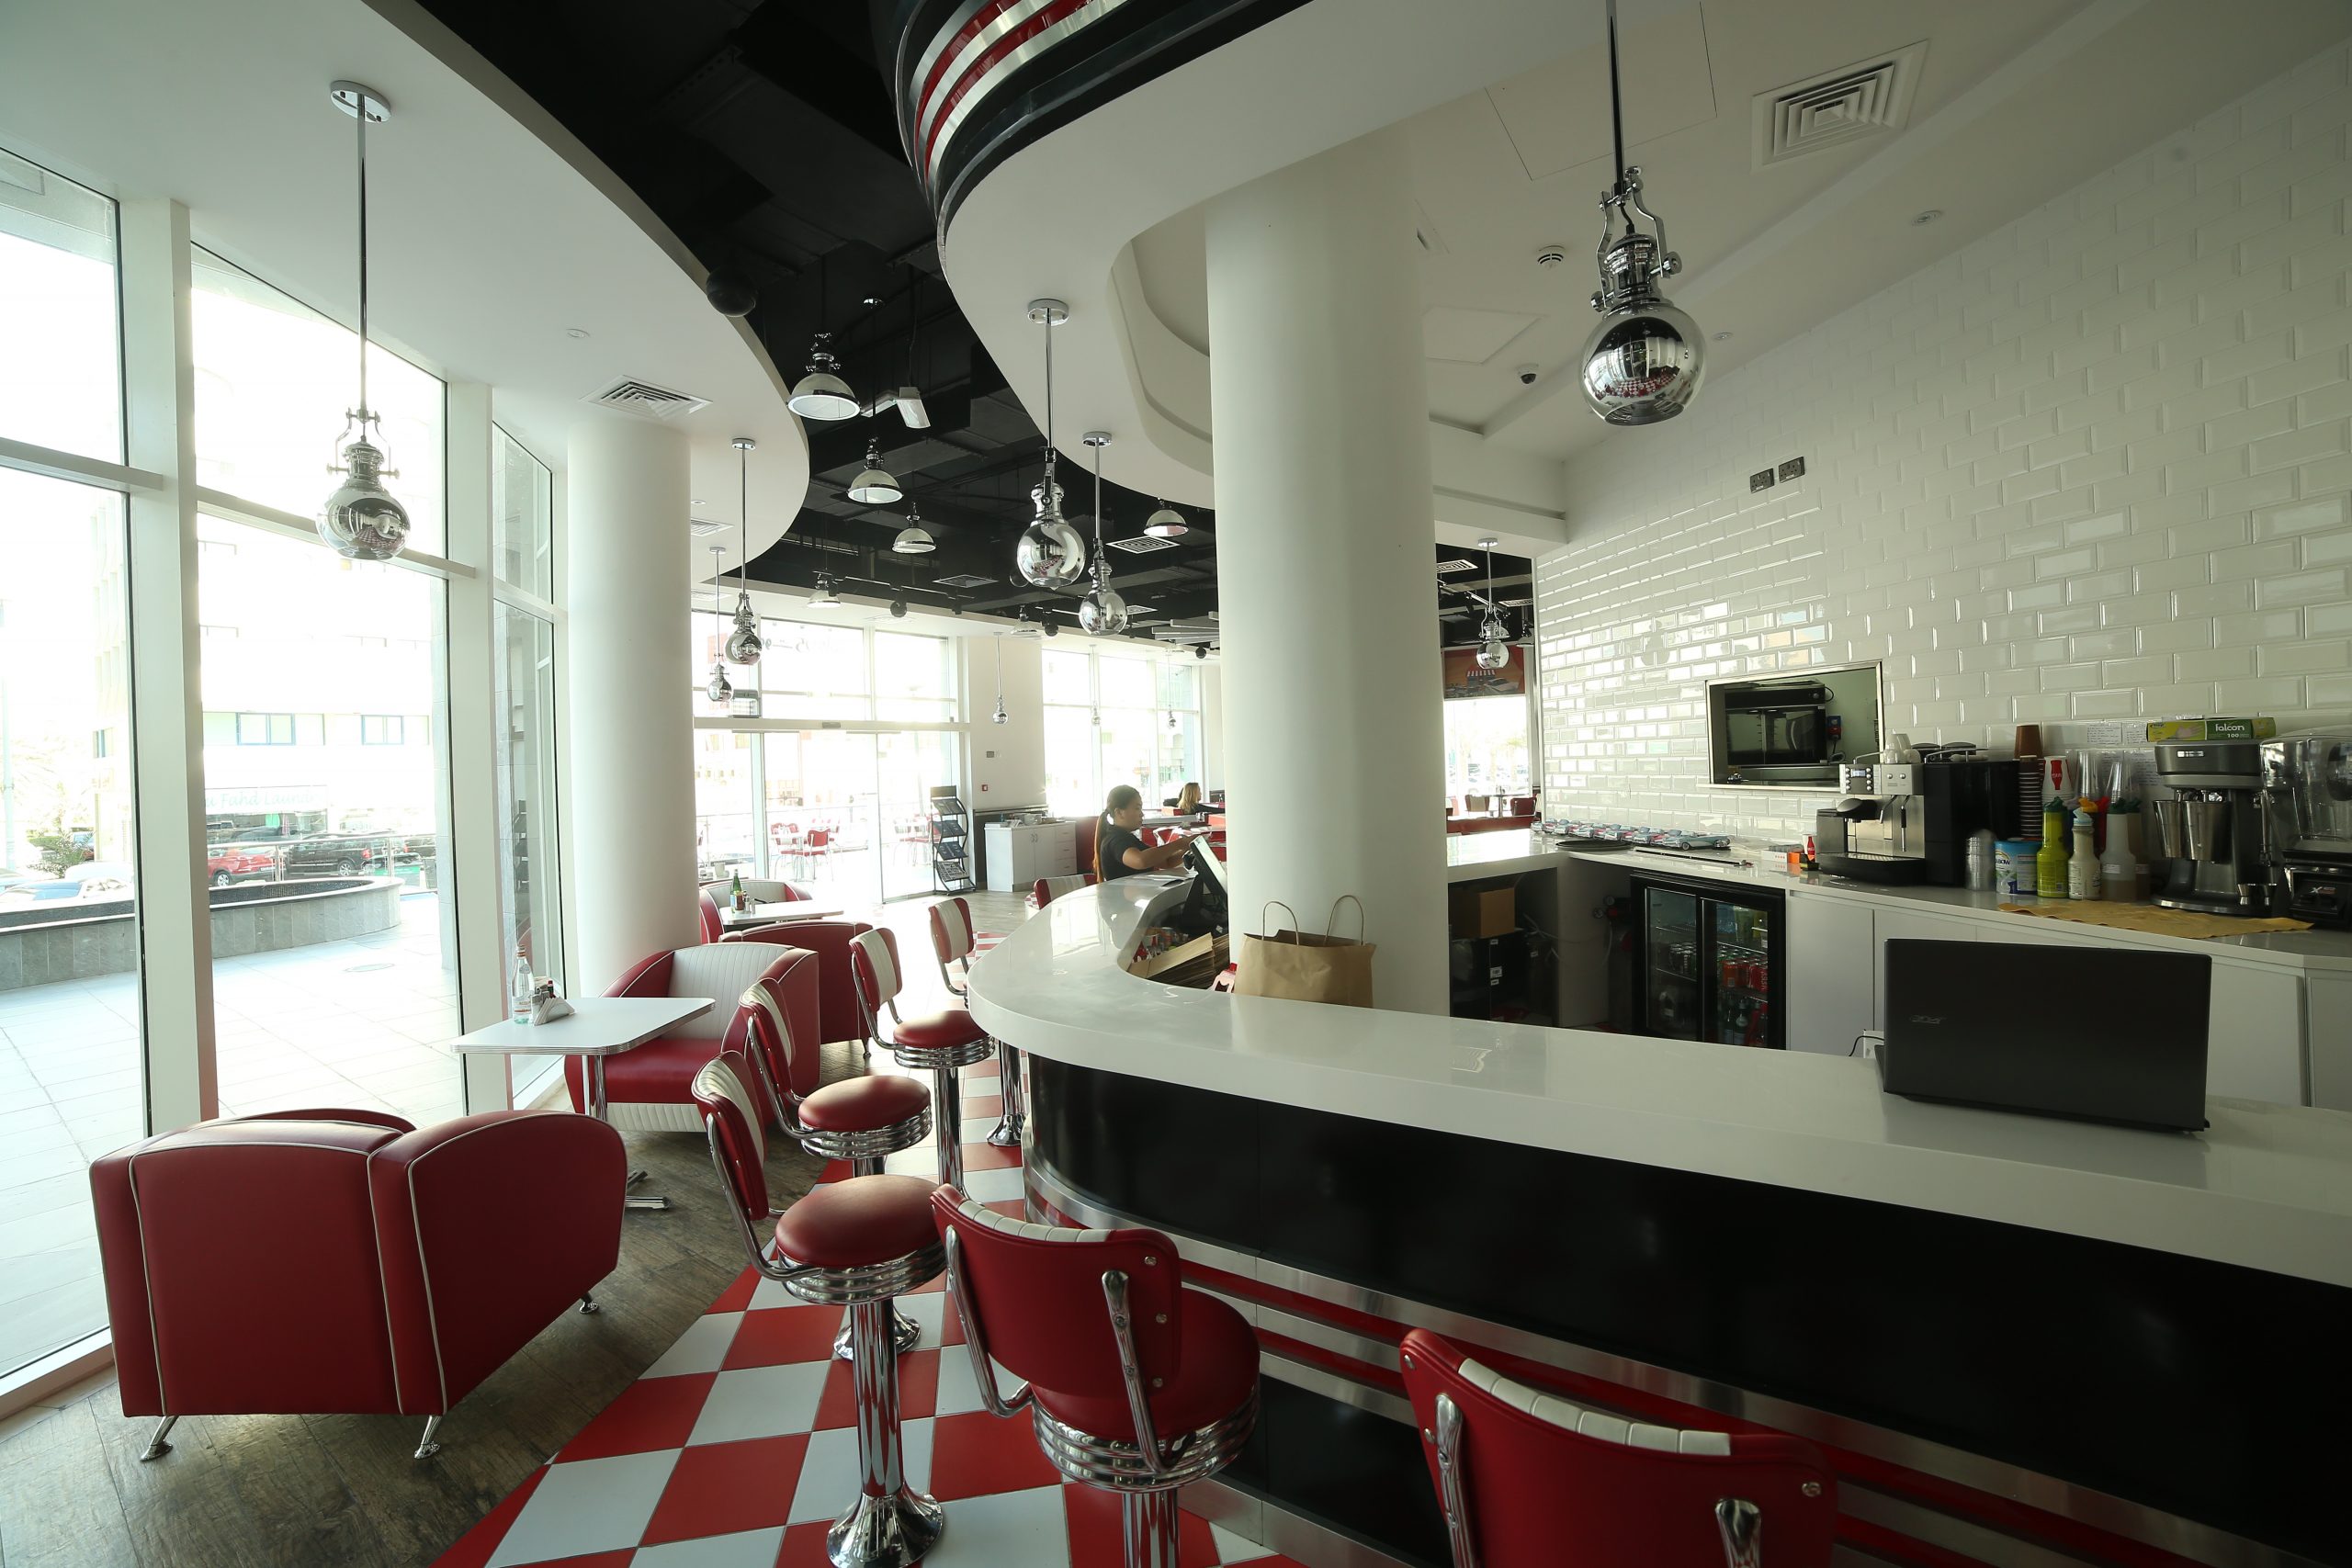 American Diner | Food & Beverages Interior Fit Out Company In Dubai